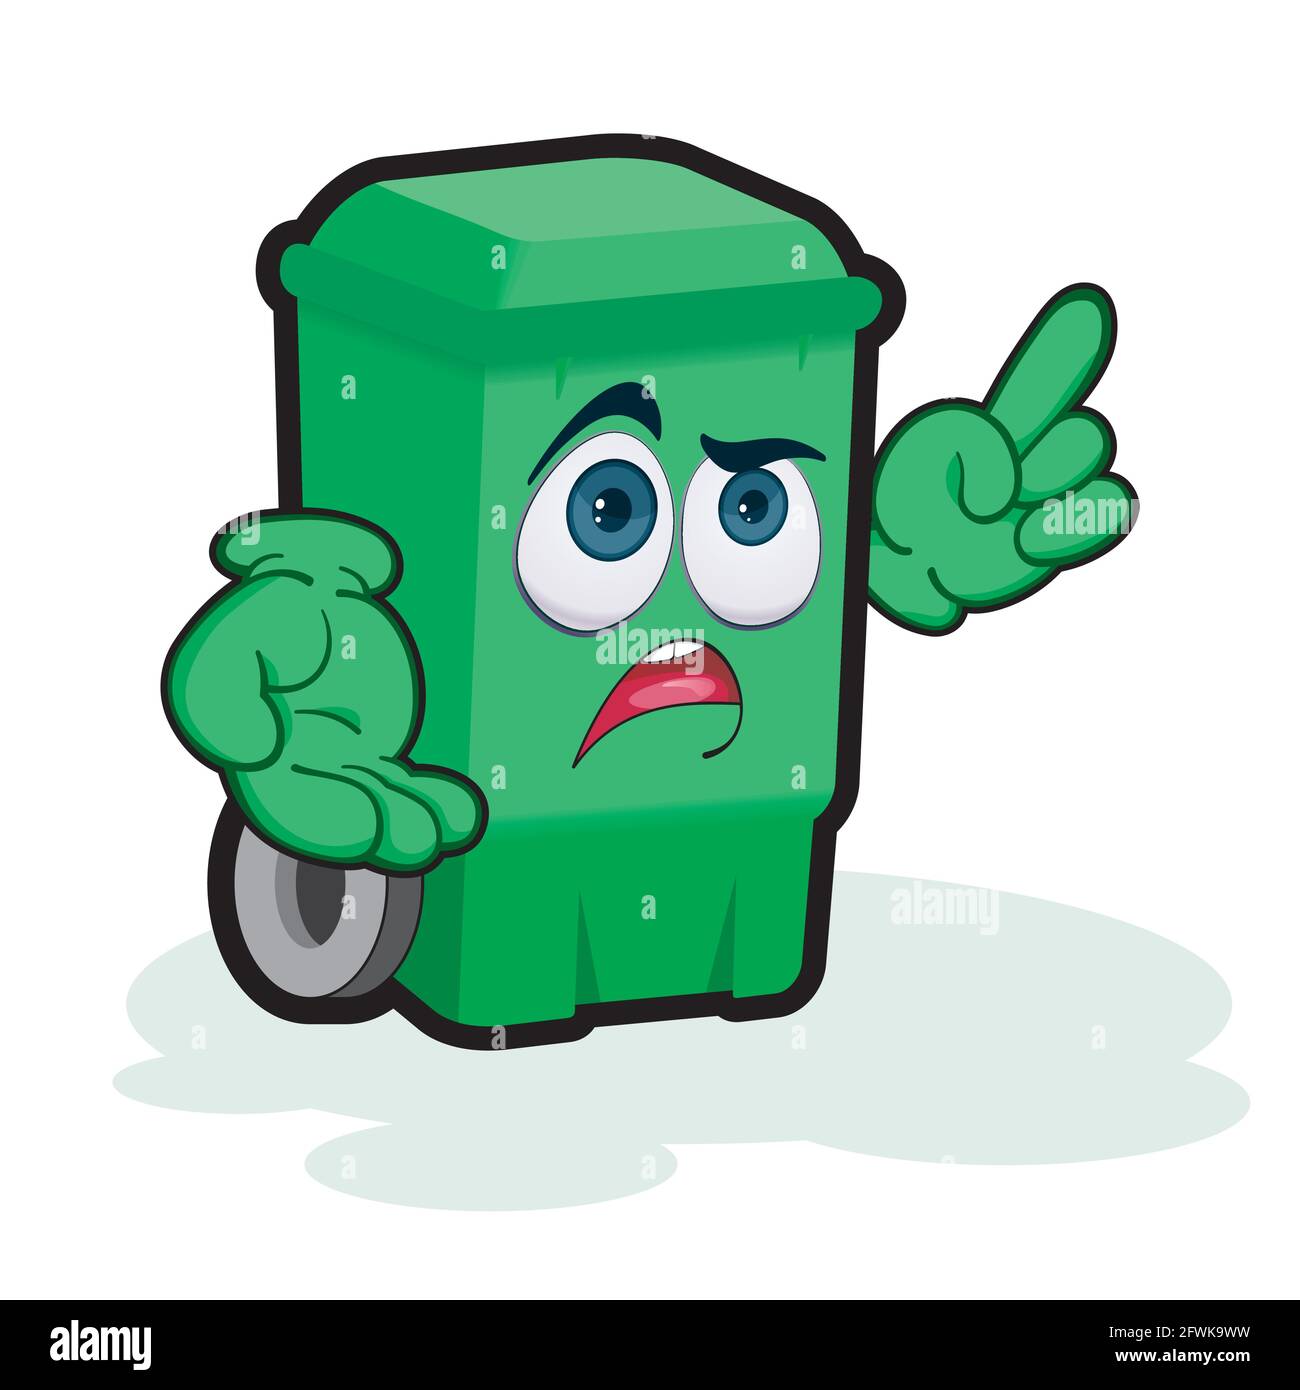 https://c8.alamy.com/comp/2FWK9WW/trash-can-cartoon-character-mascot-illustration-trash-can-reuse-recycling-and-keep-clean-concept-2FWK9WW.jpg